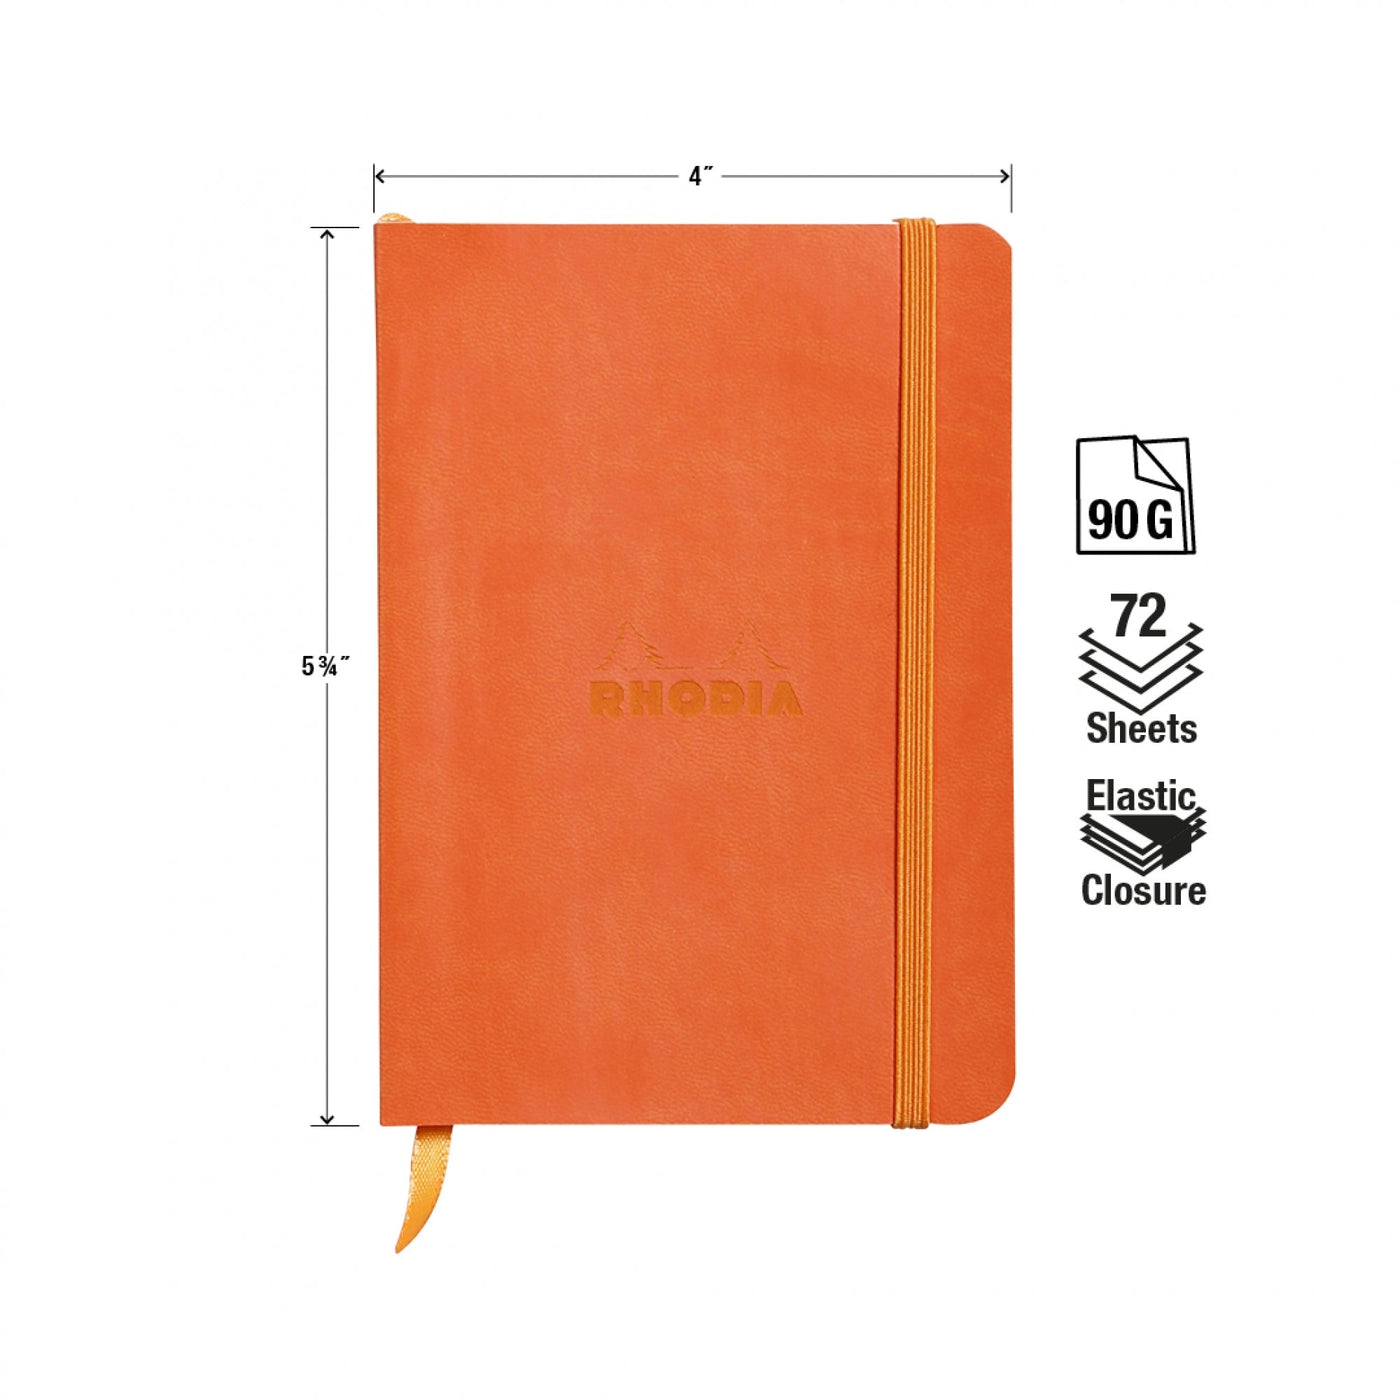 Rhodia Rhodiarama Tangerine A6 Soft Cover Dotted Notebook Measurements